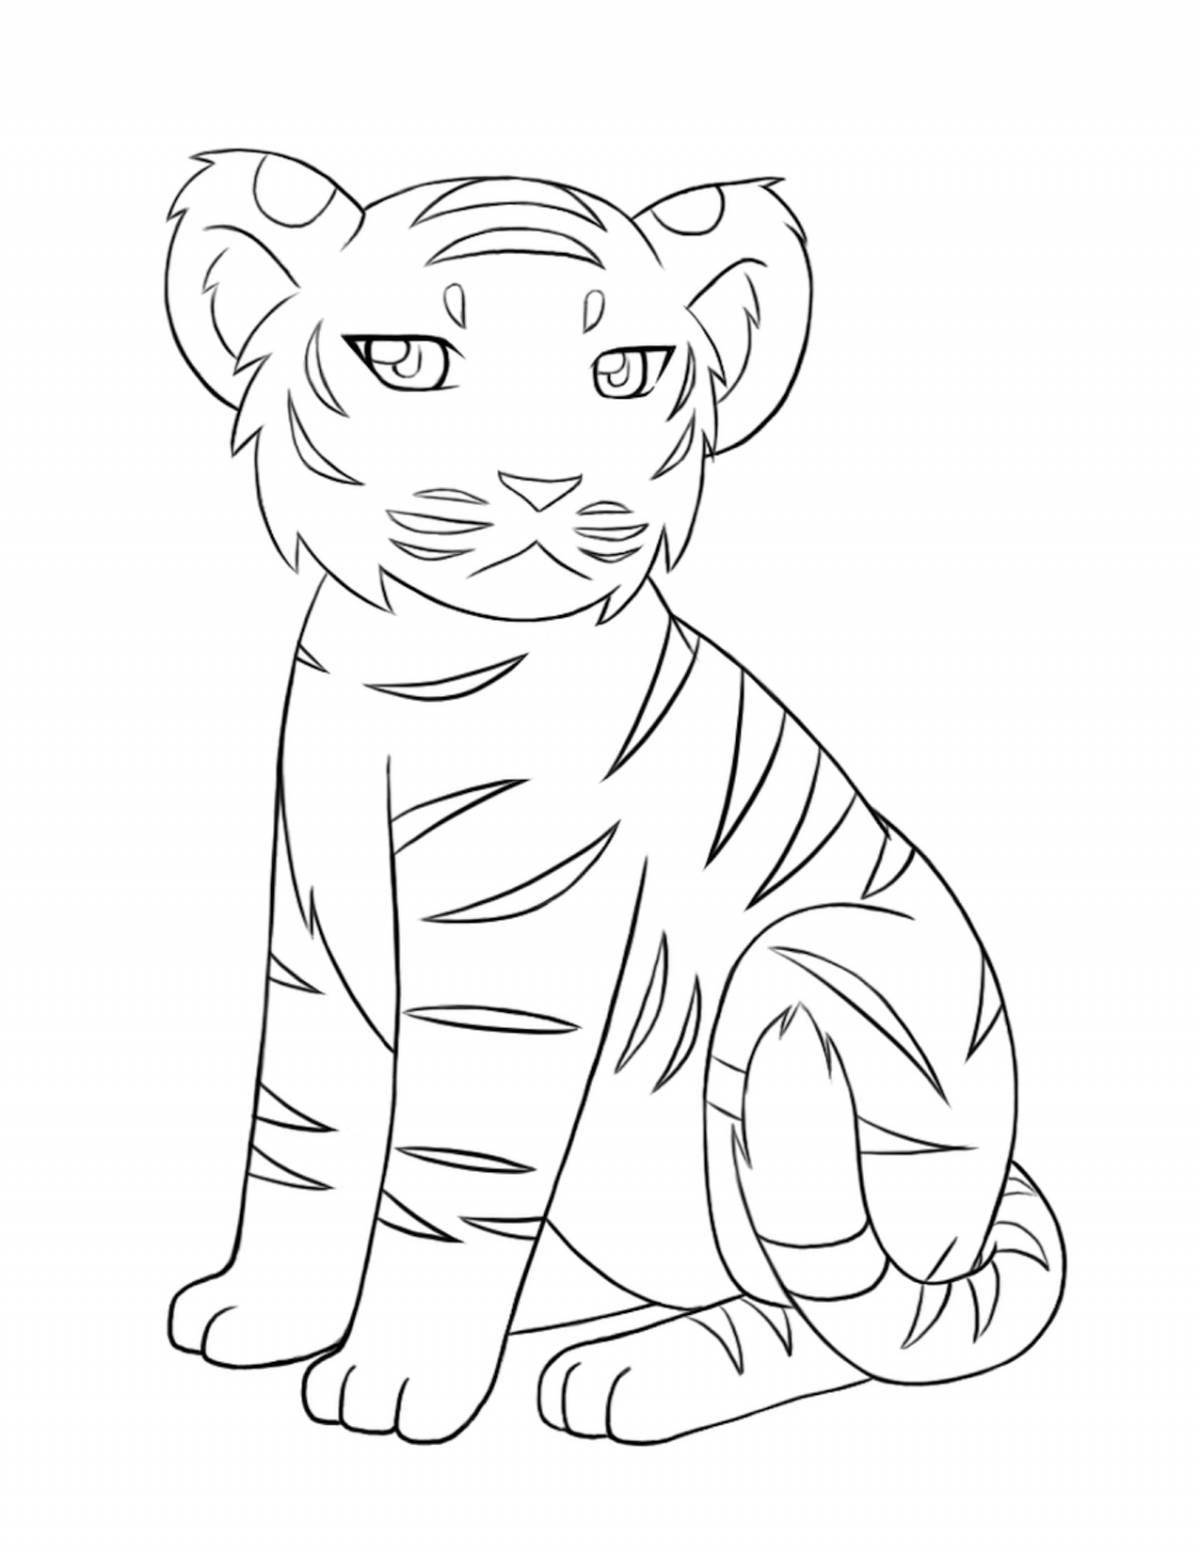 Bengal tiger coloring page